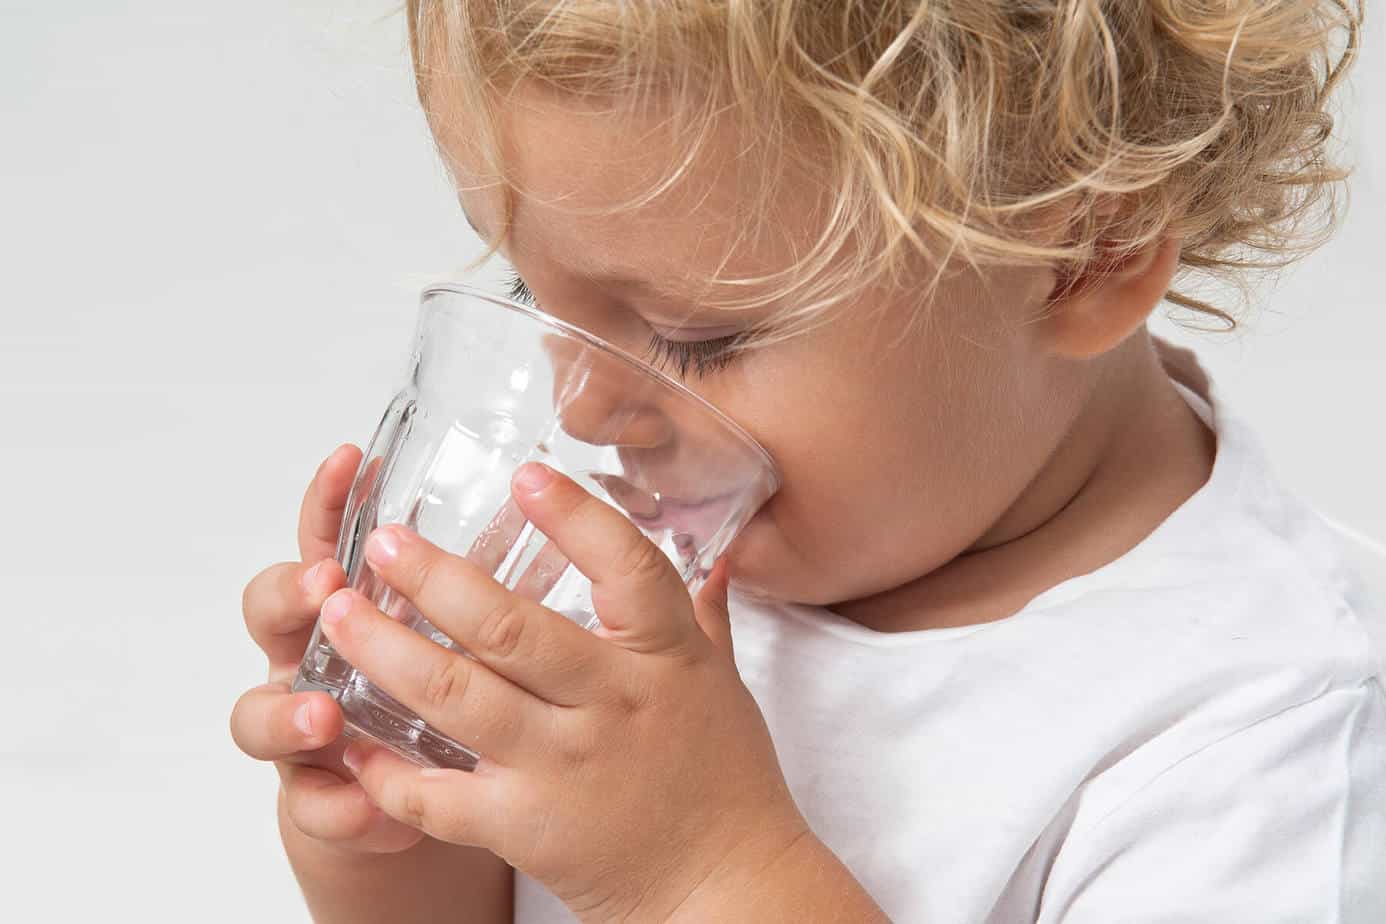 How Much Water Should a Toddler Drink?